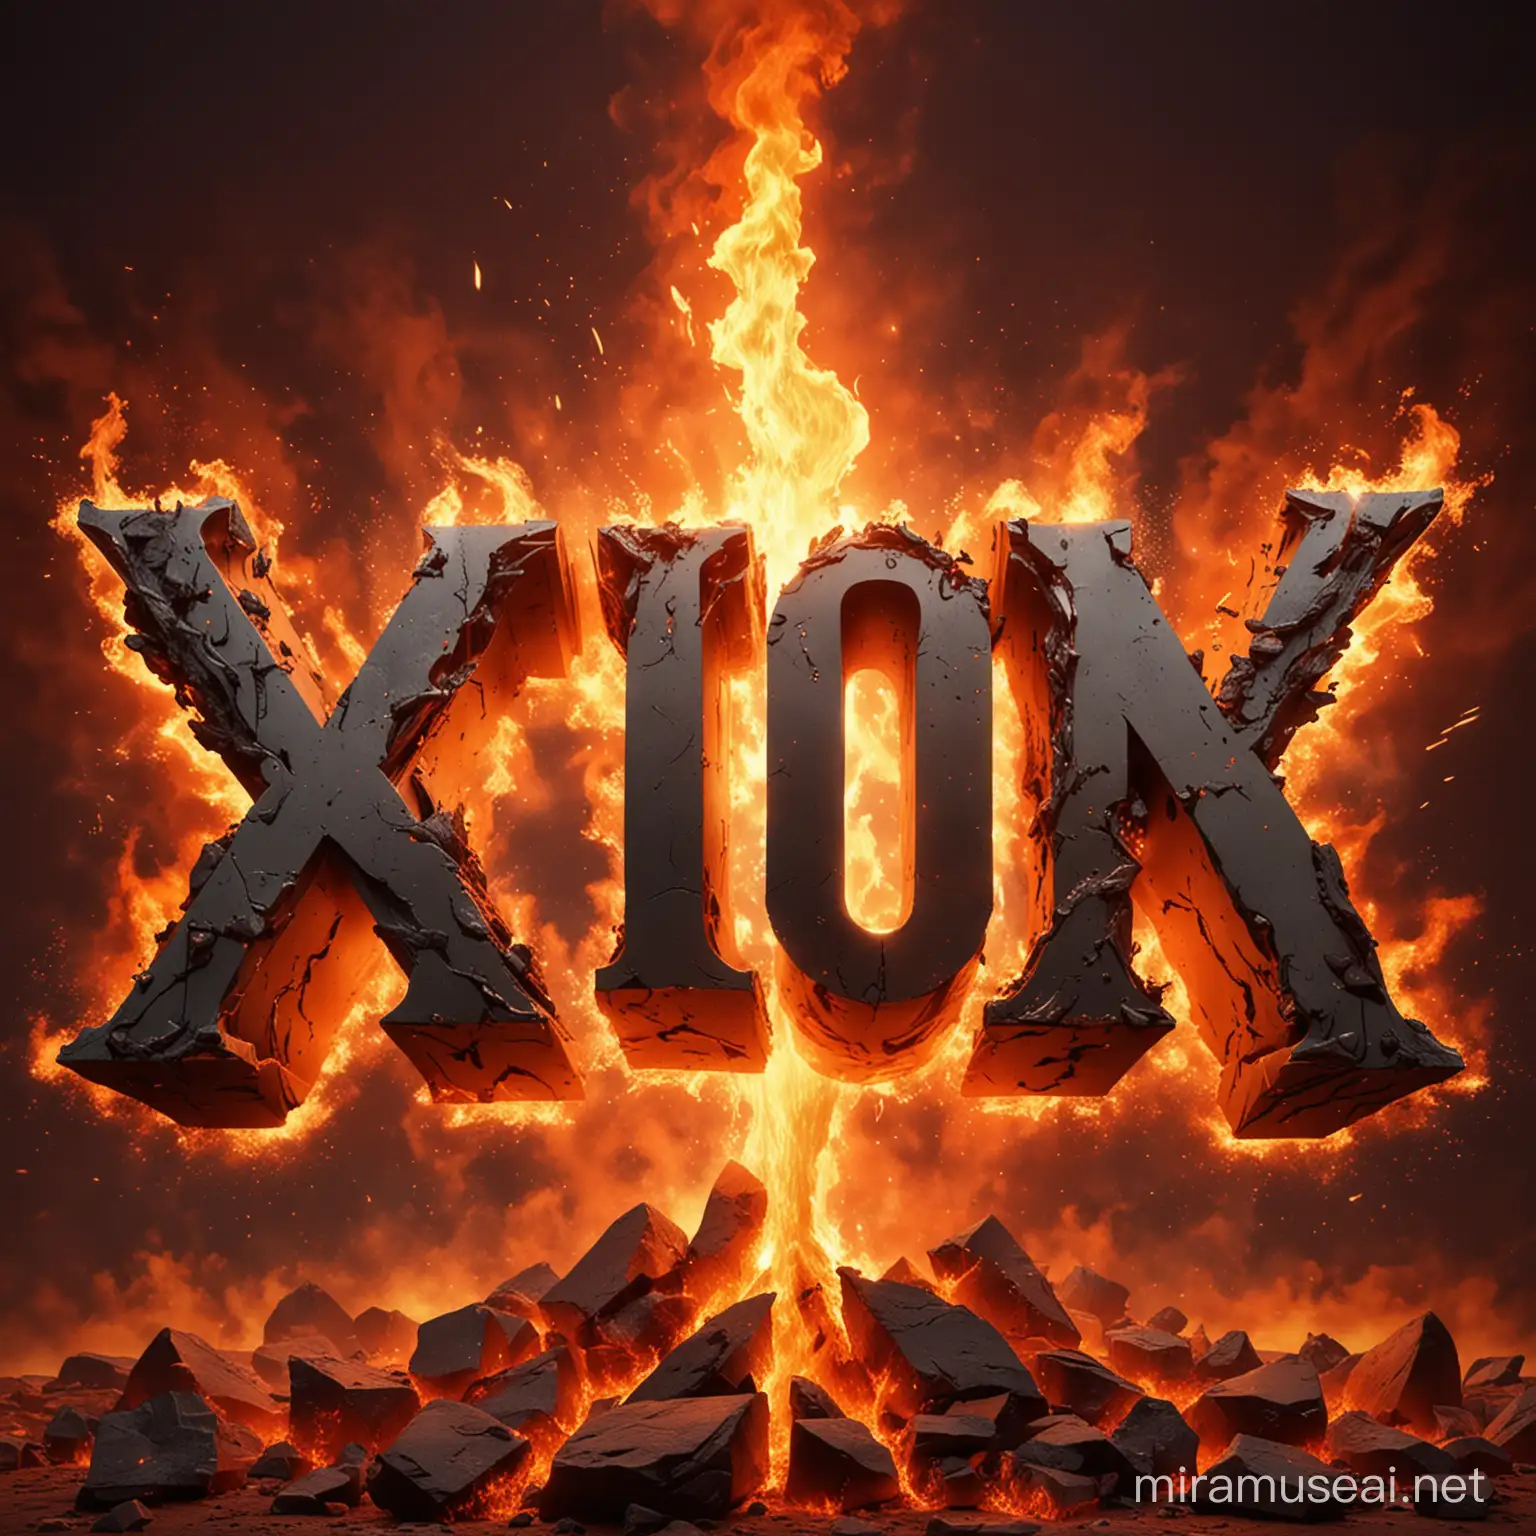 Fiery 3D Inscription XION Bold and Dynamic Typography on Flame Background